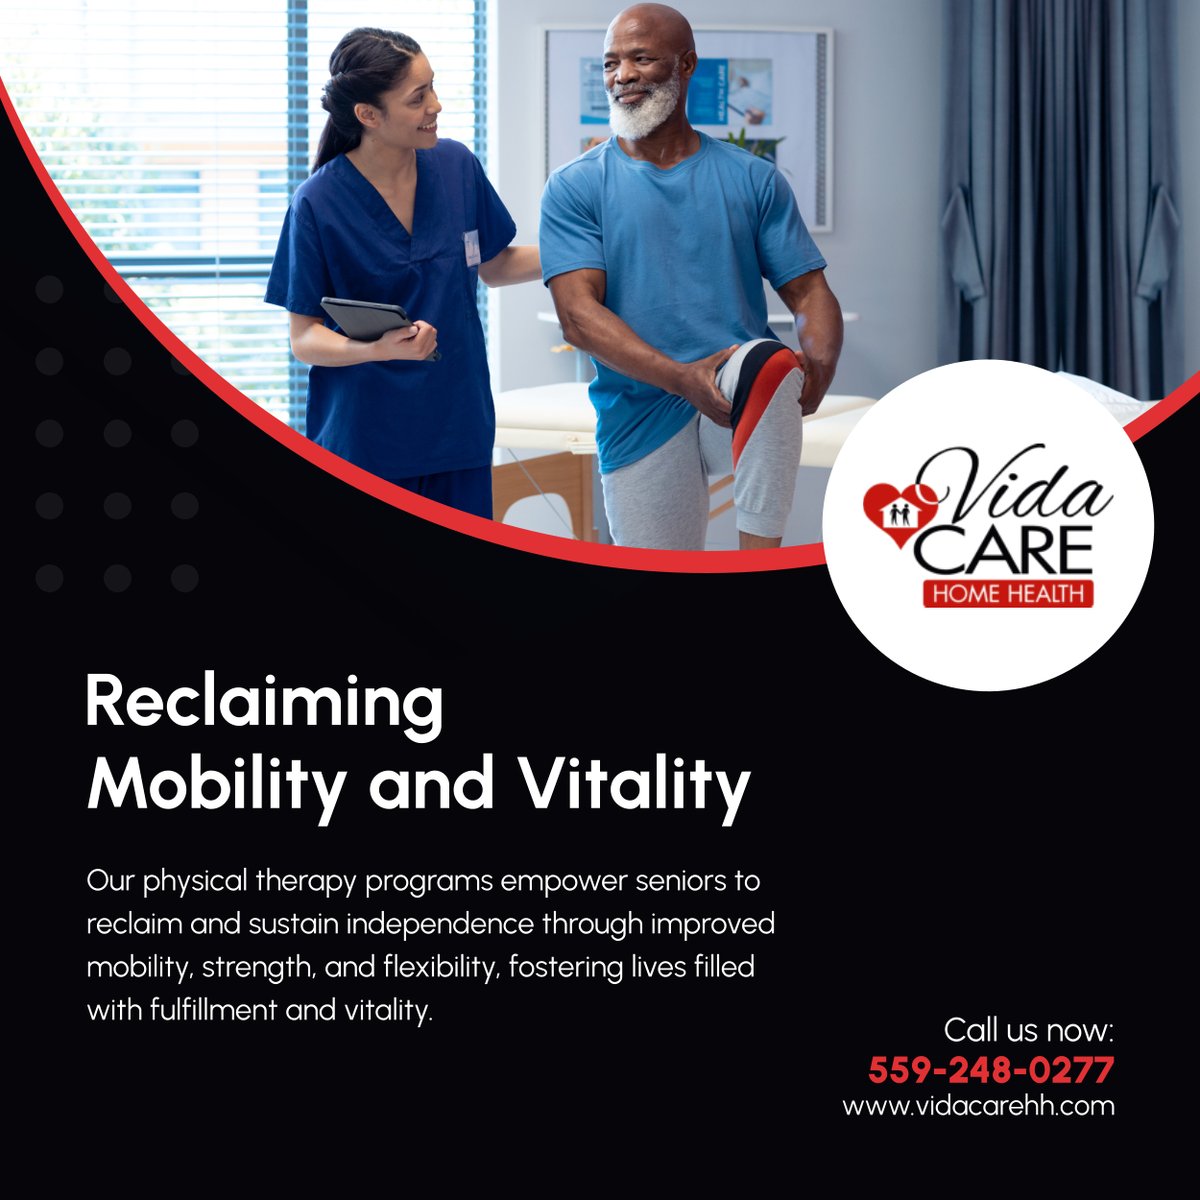 Discover how Vida Care Home Health's physical therapy services transform the lives of seniors, enabling them to enjoy greater mobility, strength, and quality of life within the comforts of home. Visit tinyurl.com/29zrfemf to learn more. 

#HomeHealthCare #PhysicalTherapy